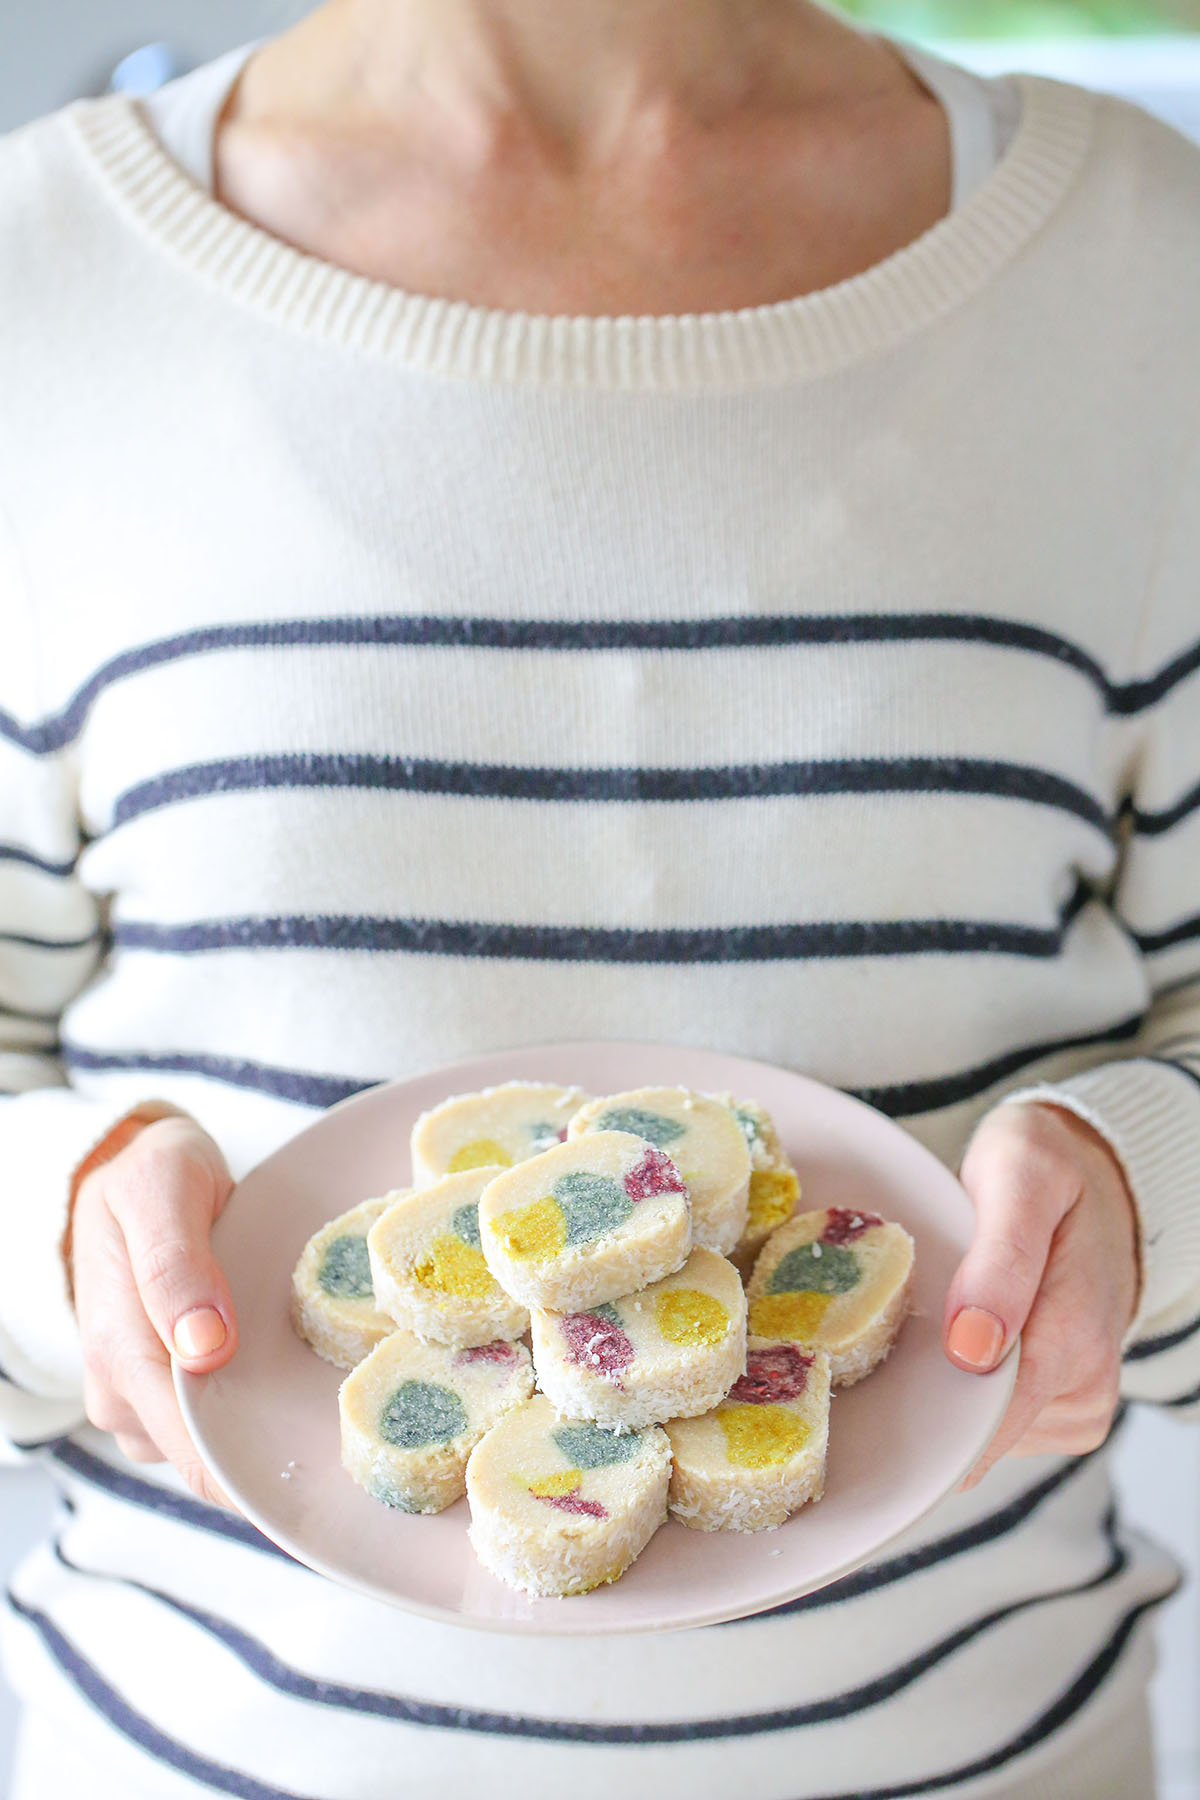 Delicious childhood lolly cake recipe, like your favourite lolly slice or log, but made healthy so friendly for anyone who is plant-based, vegan, gluten free, refined sugar free, low-sugar, paleo or keto!